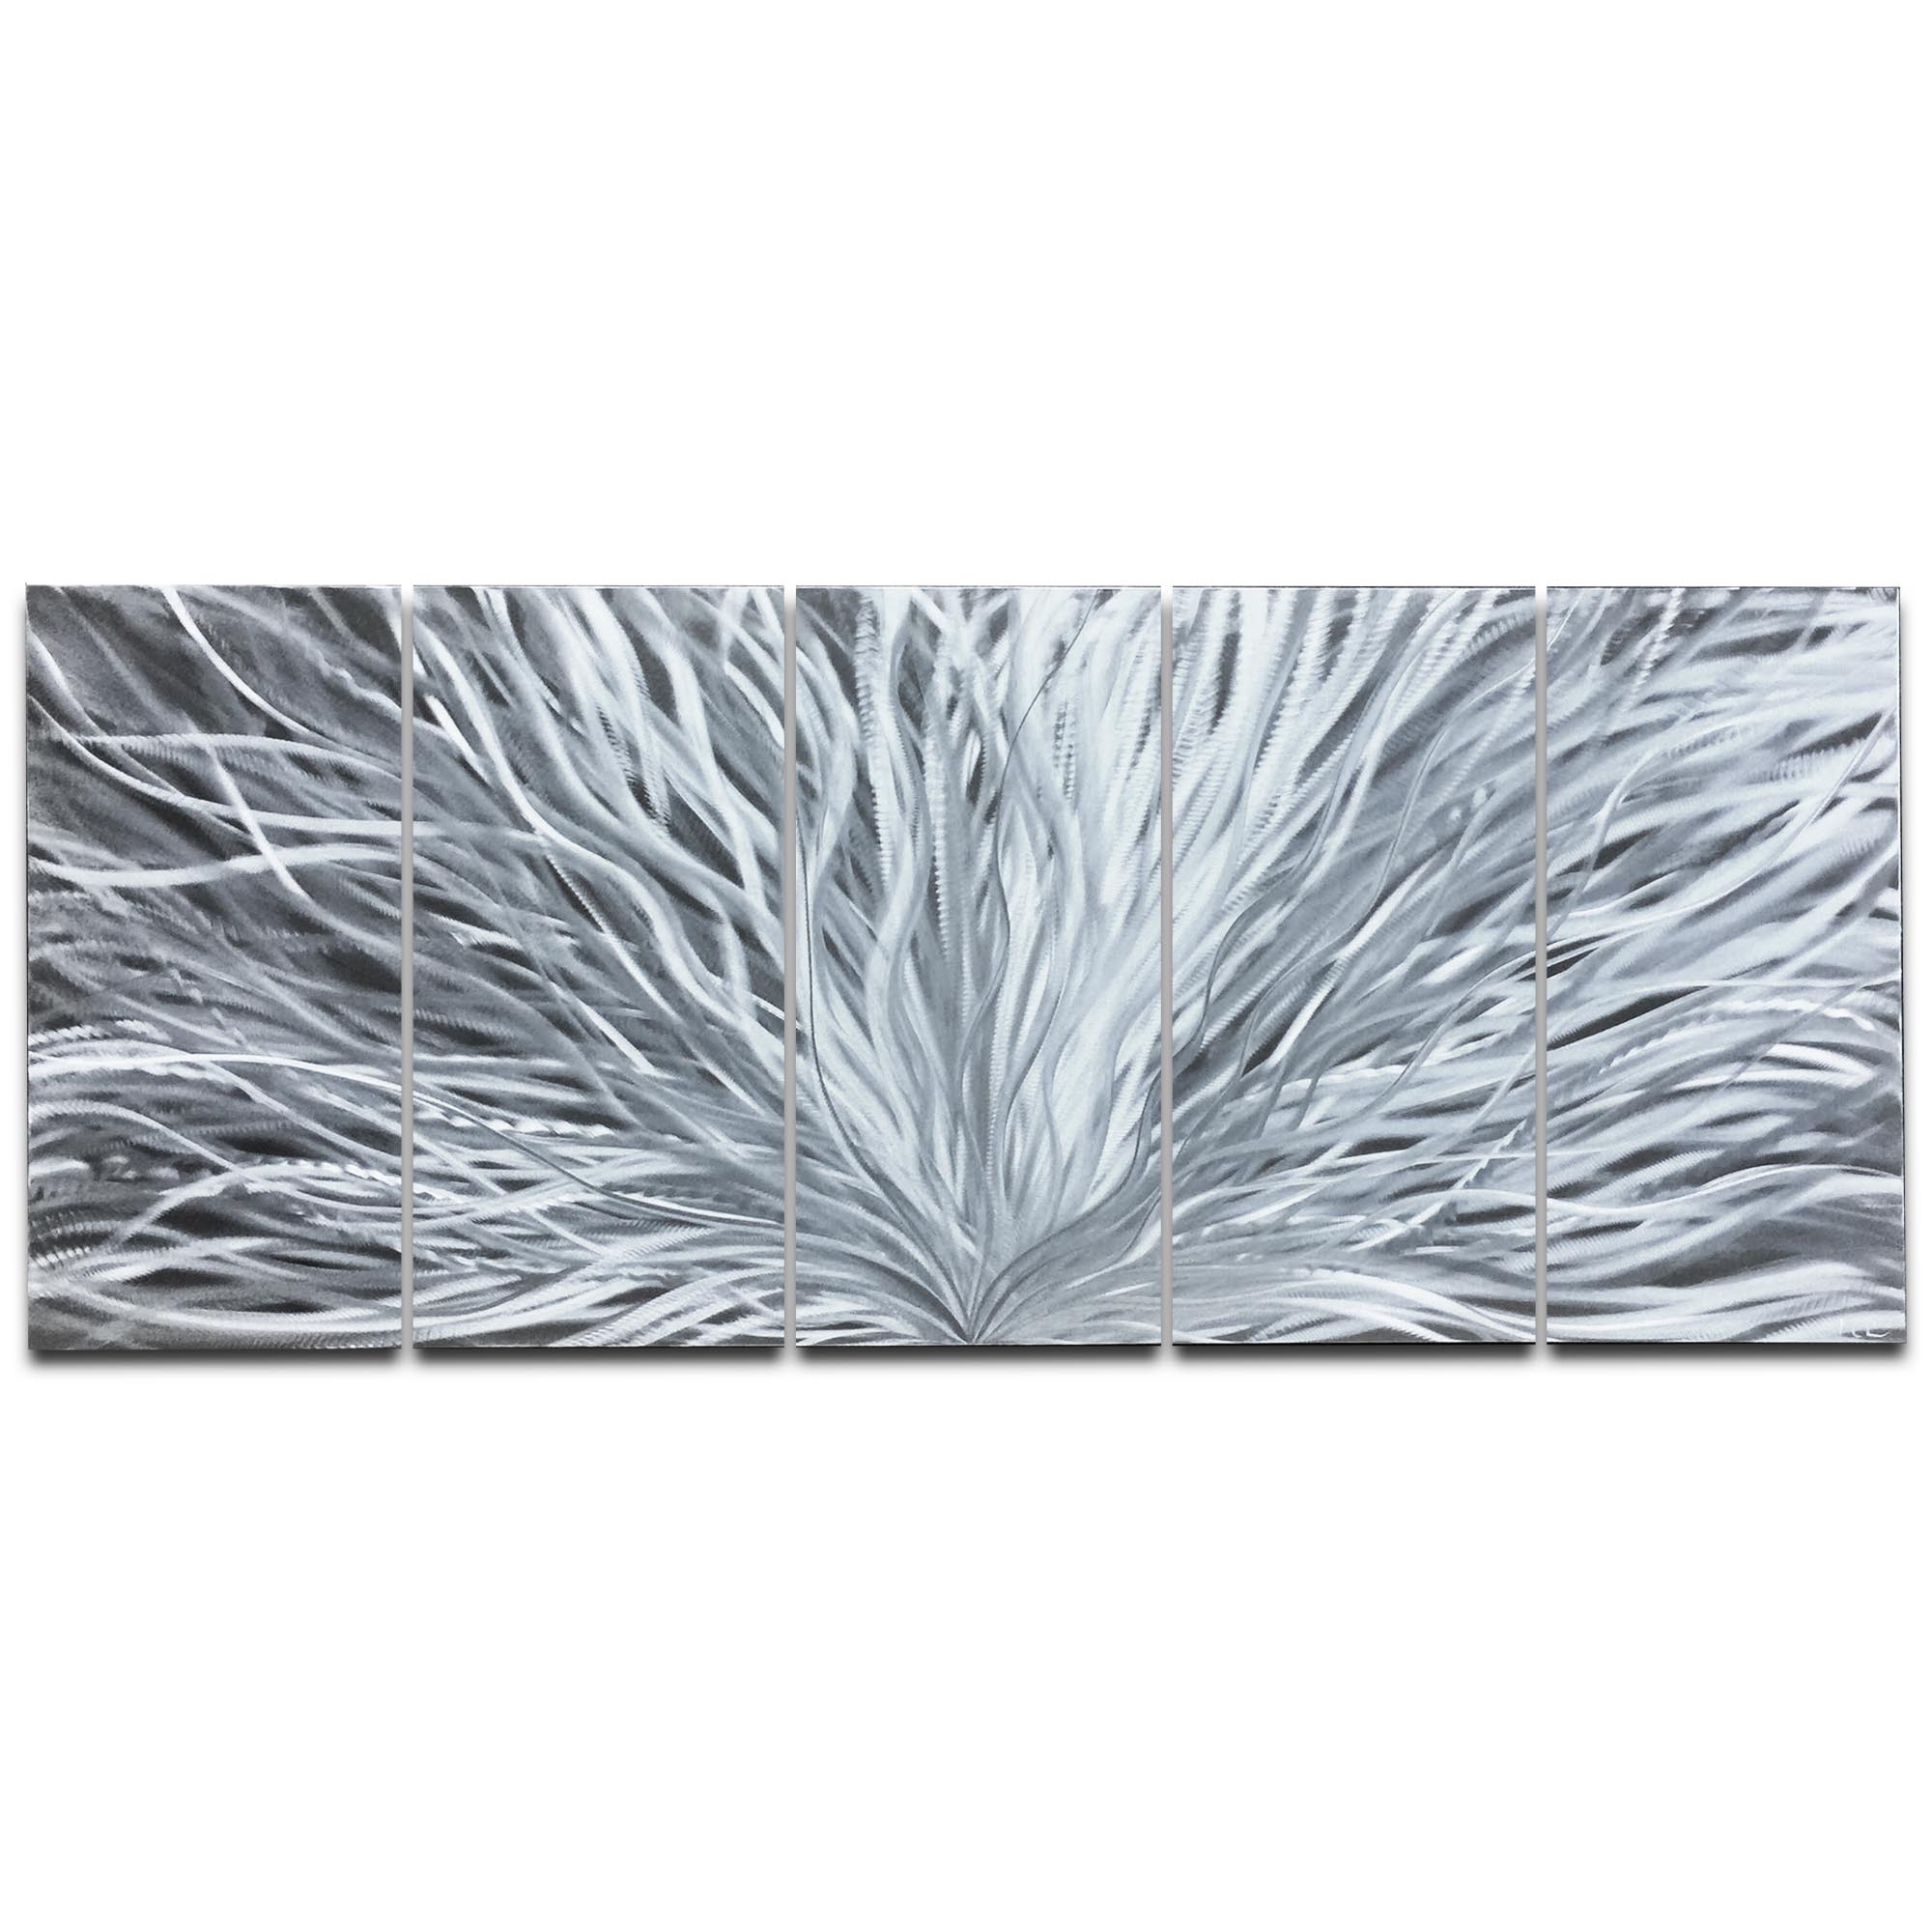 Blooming by Helena Martin - Abstract Metal Art on Natural Aluminum